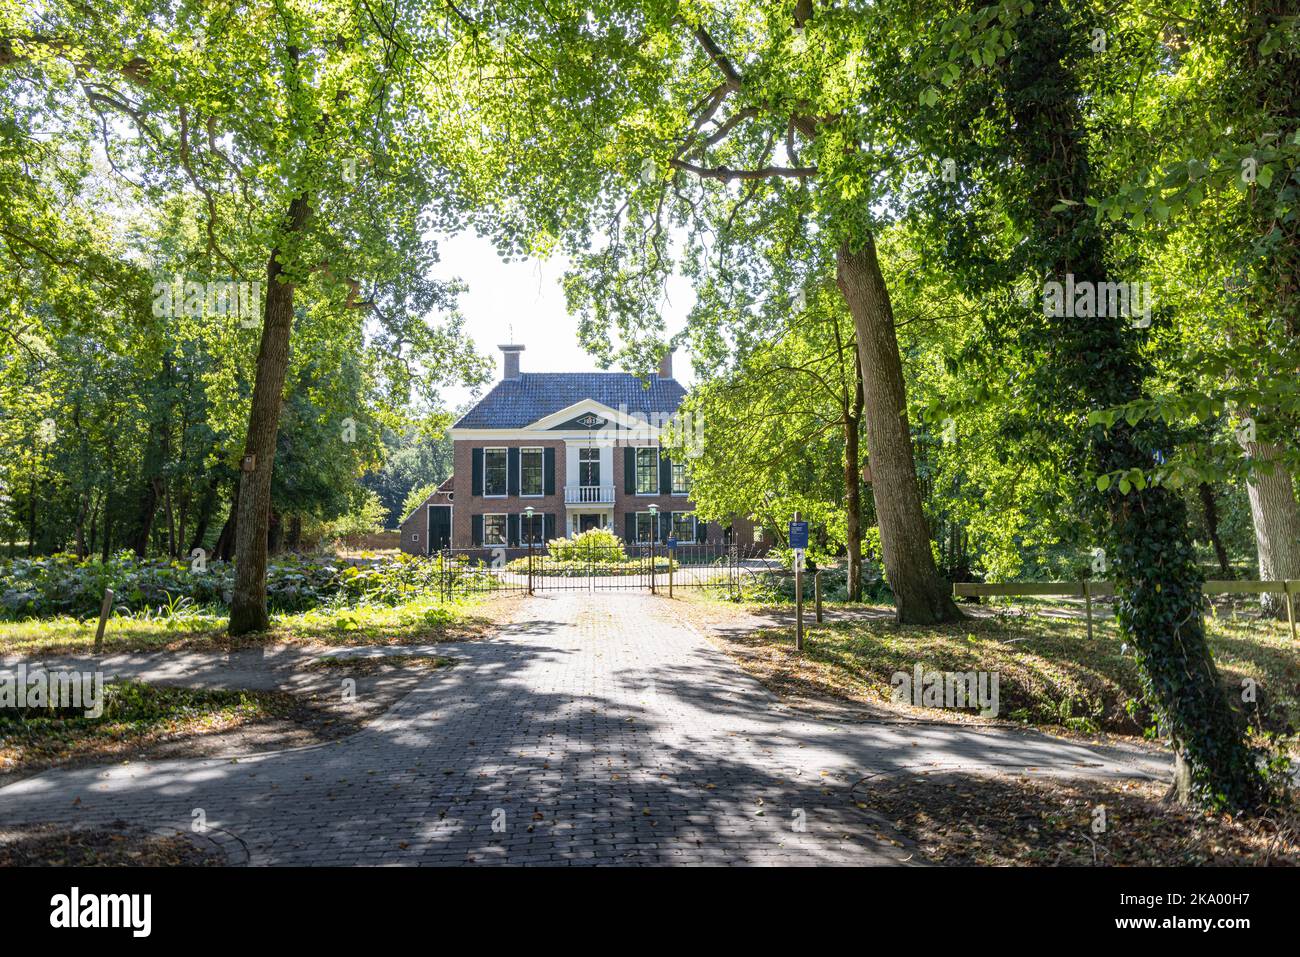 Mansion at estate Coendersborg in Nuis in municipality Westerkwartier in Groningen province the Netherlands Stock Photo